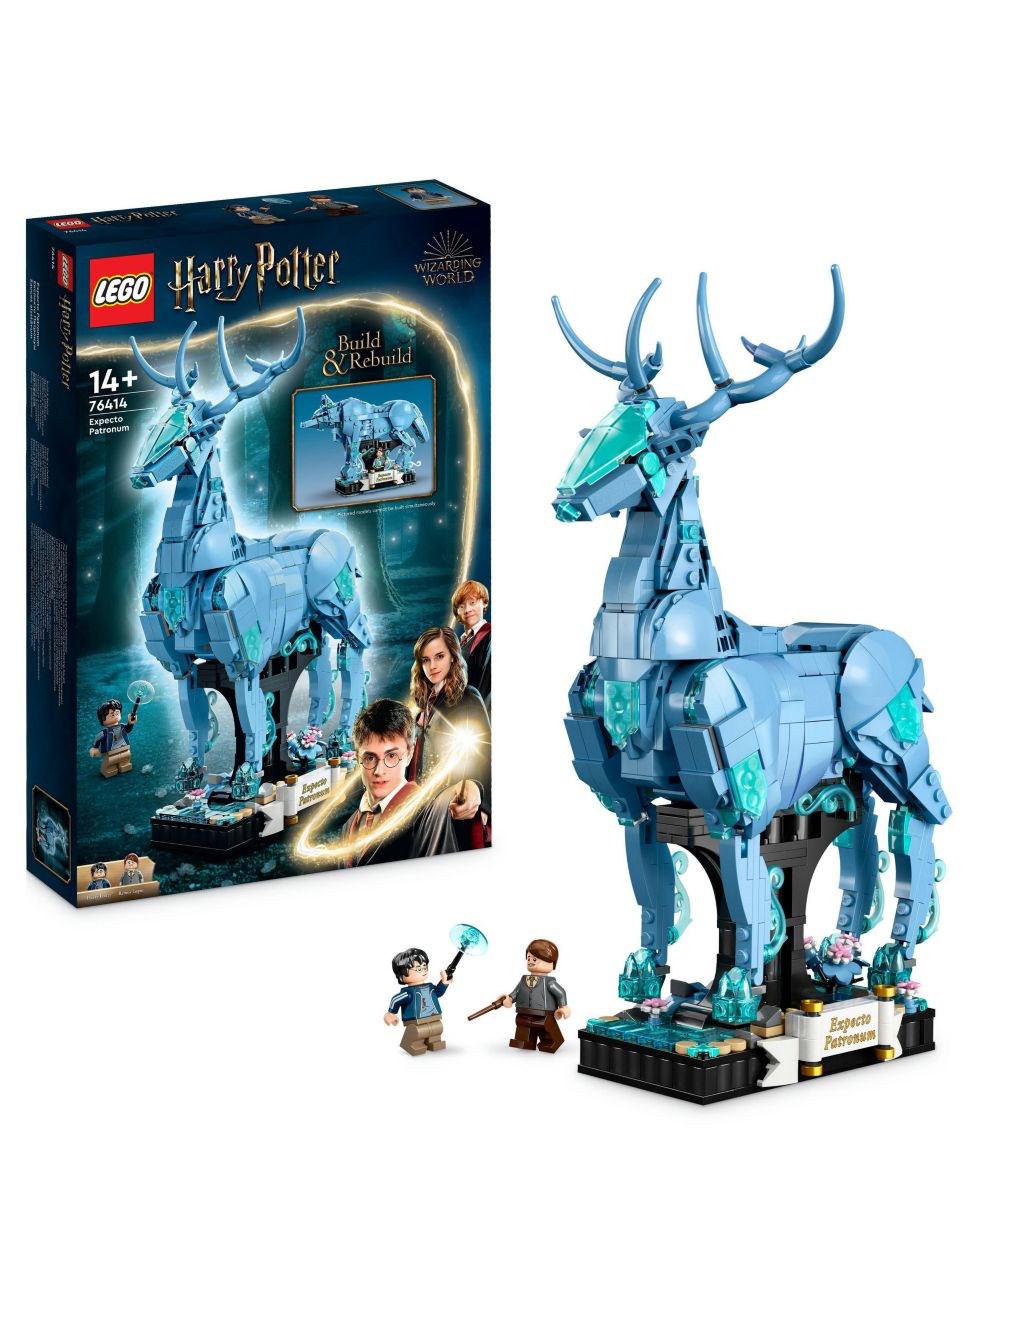 LEGO Harry Potter Expecto Patronum 2-in-1 Set 76414 (14+ Yrs)